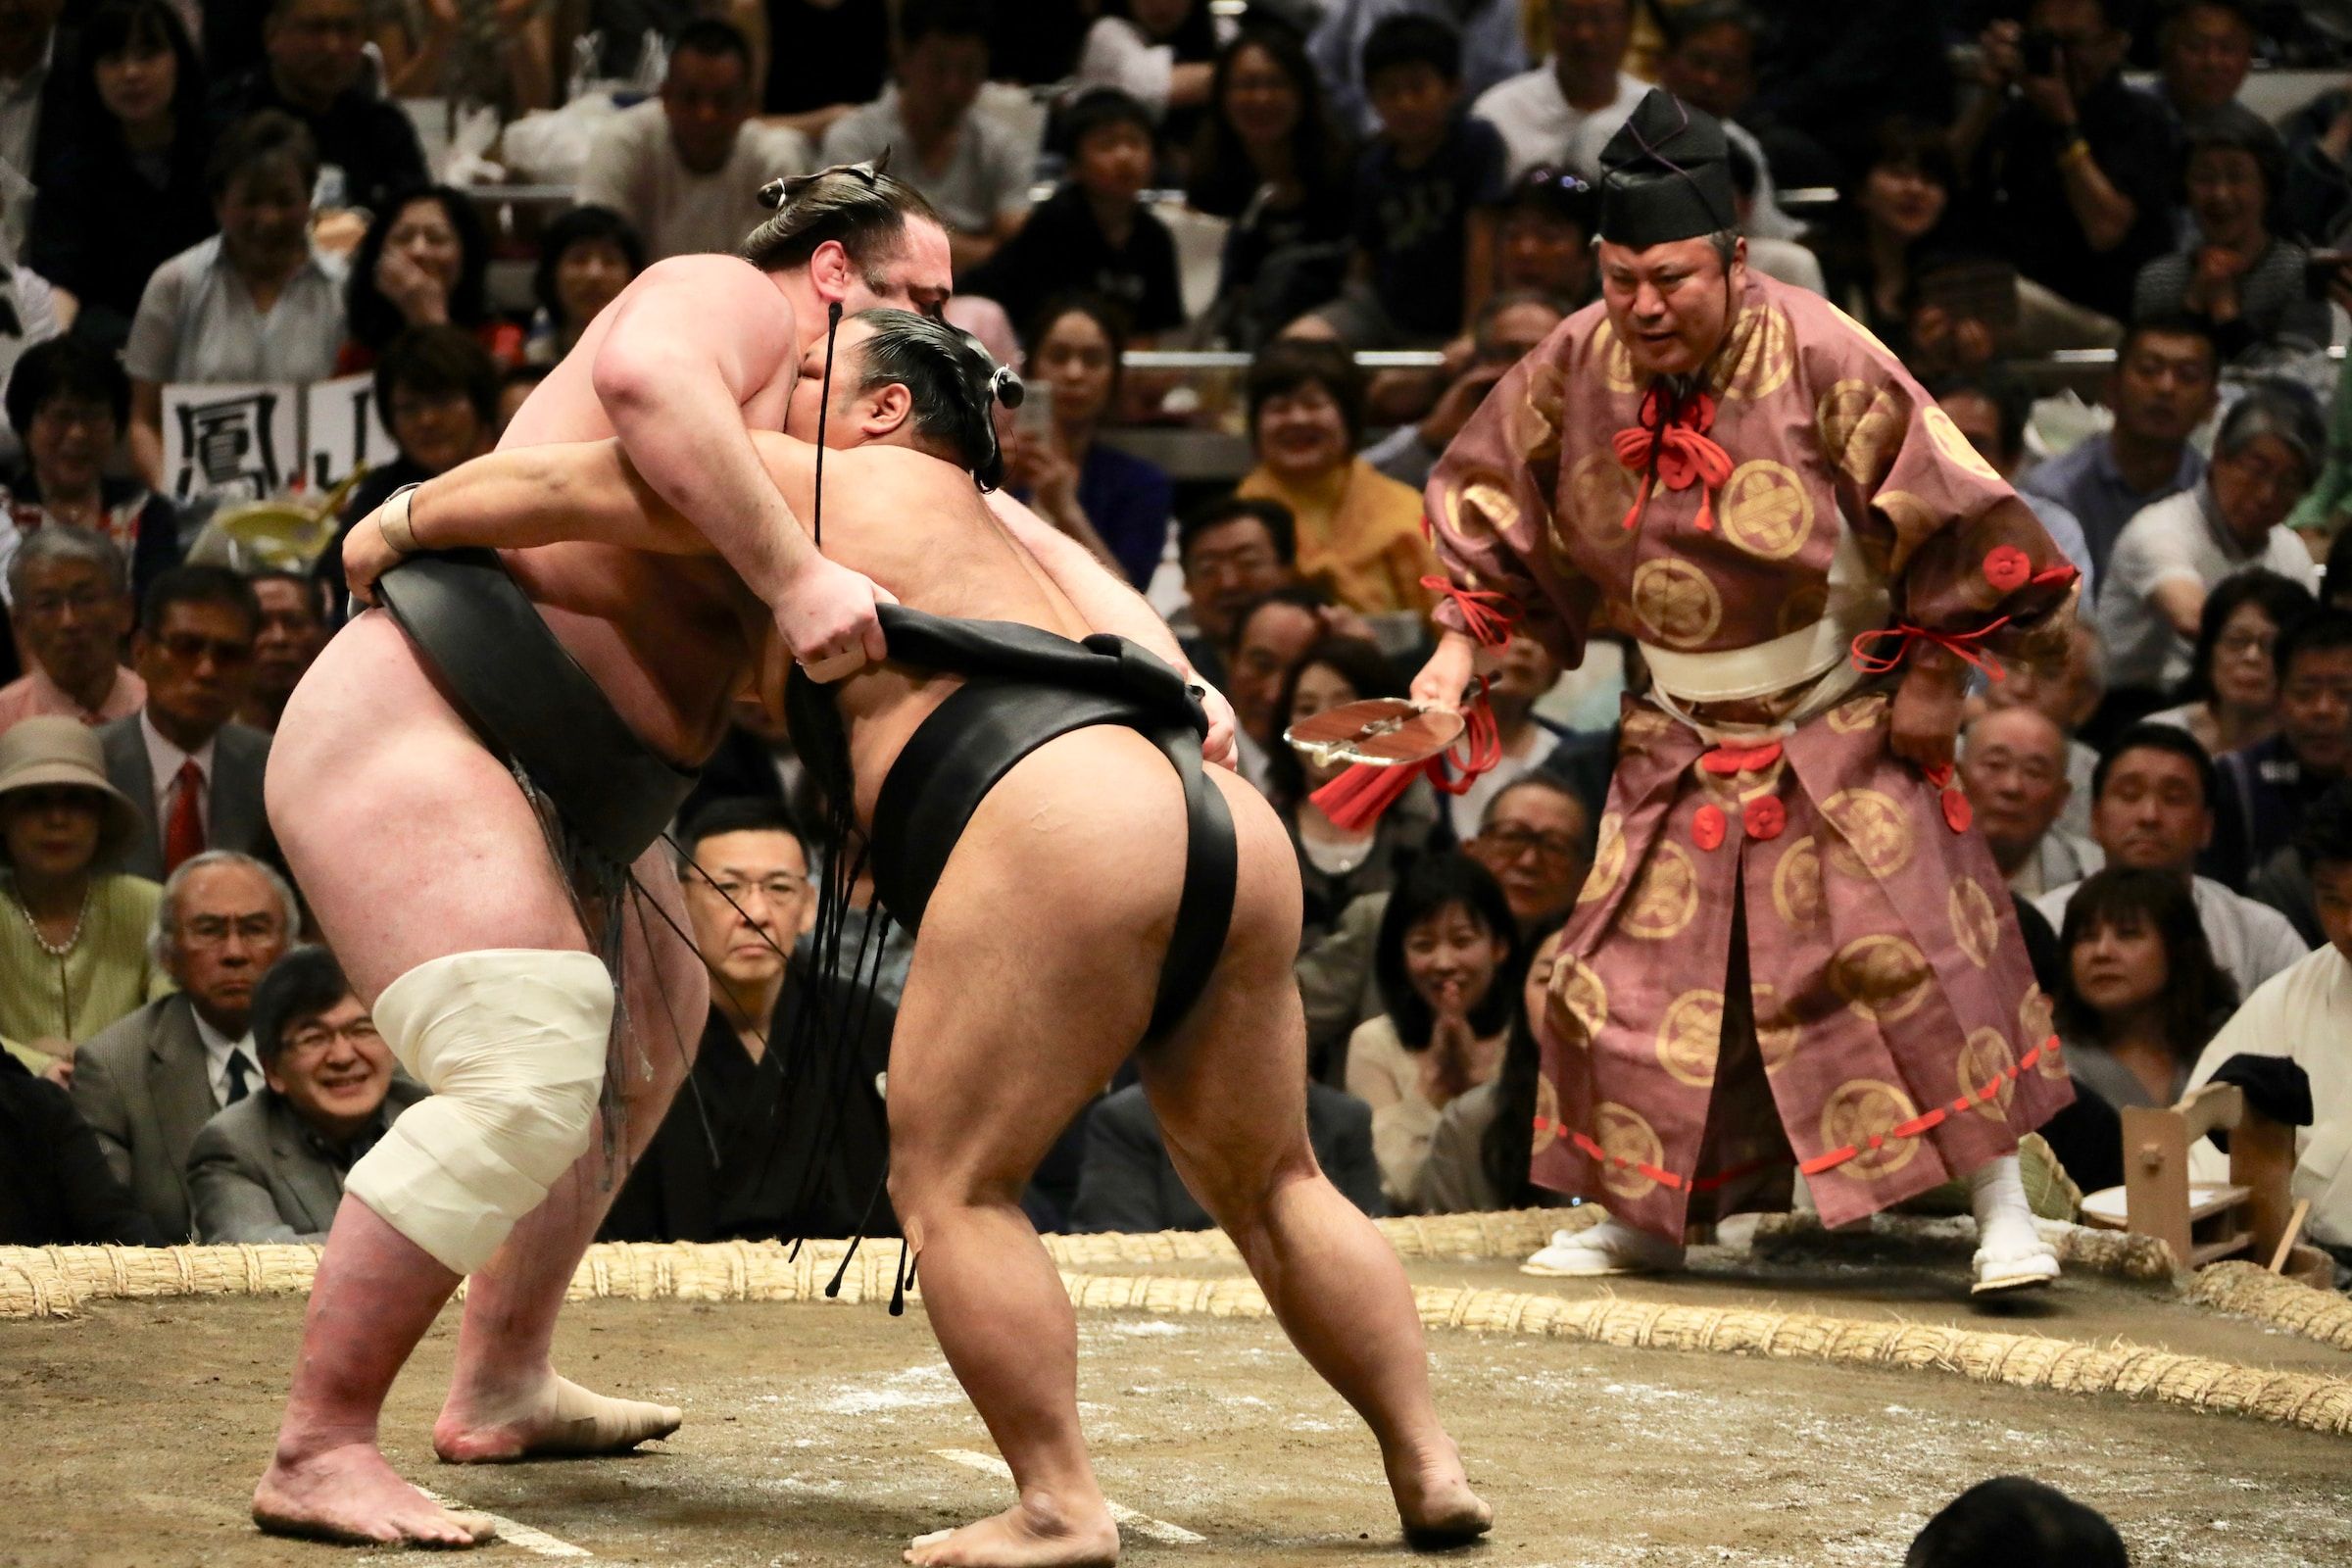 two power house sumo wrestlers fight for domination in a sport